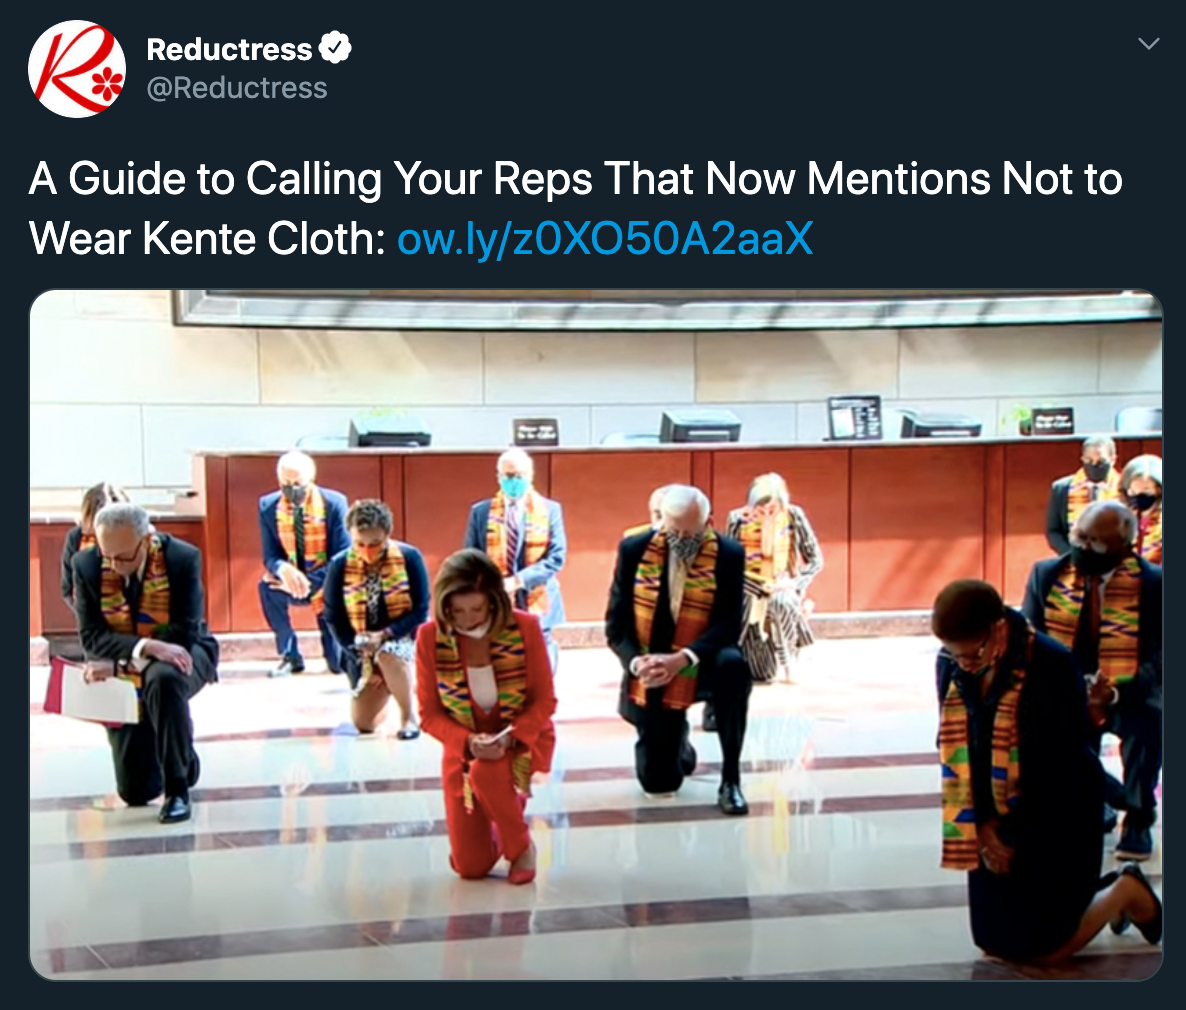 Reductress A Guide to Calling Your Reps That Now Mentions Not to Wear Kente Cloth